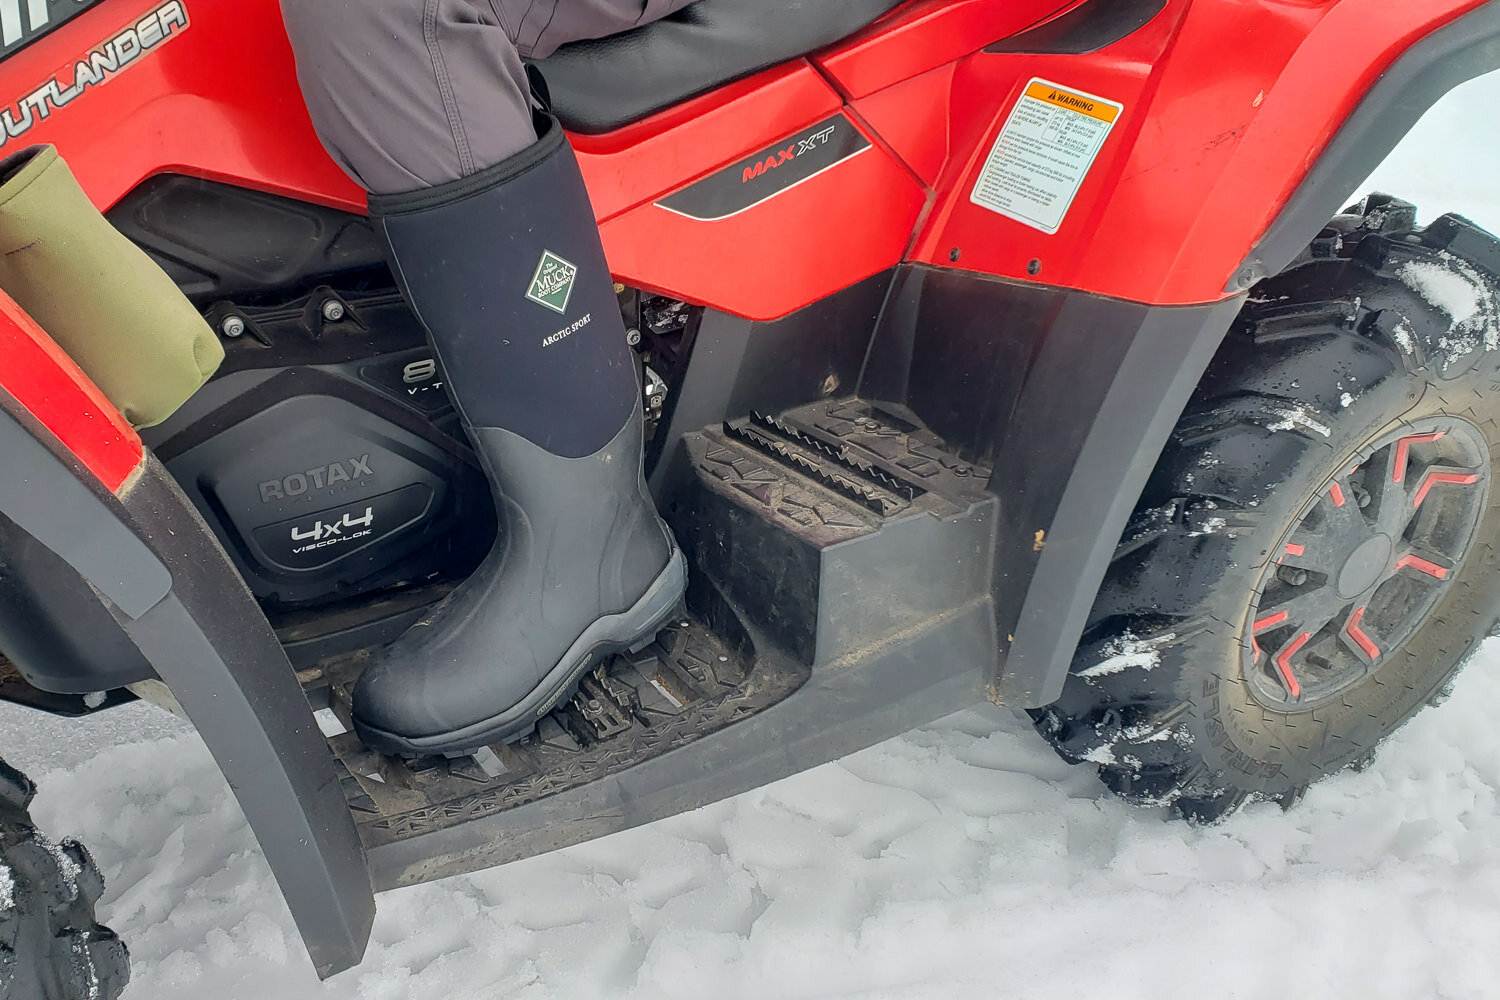 The Muck Arctic Sport Boots offer incredible warmth and protection in cold, wet conditions.